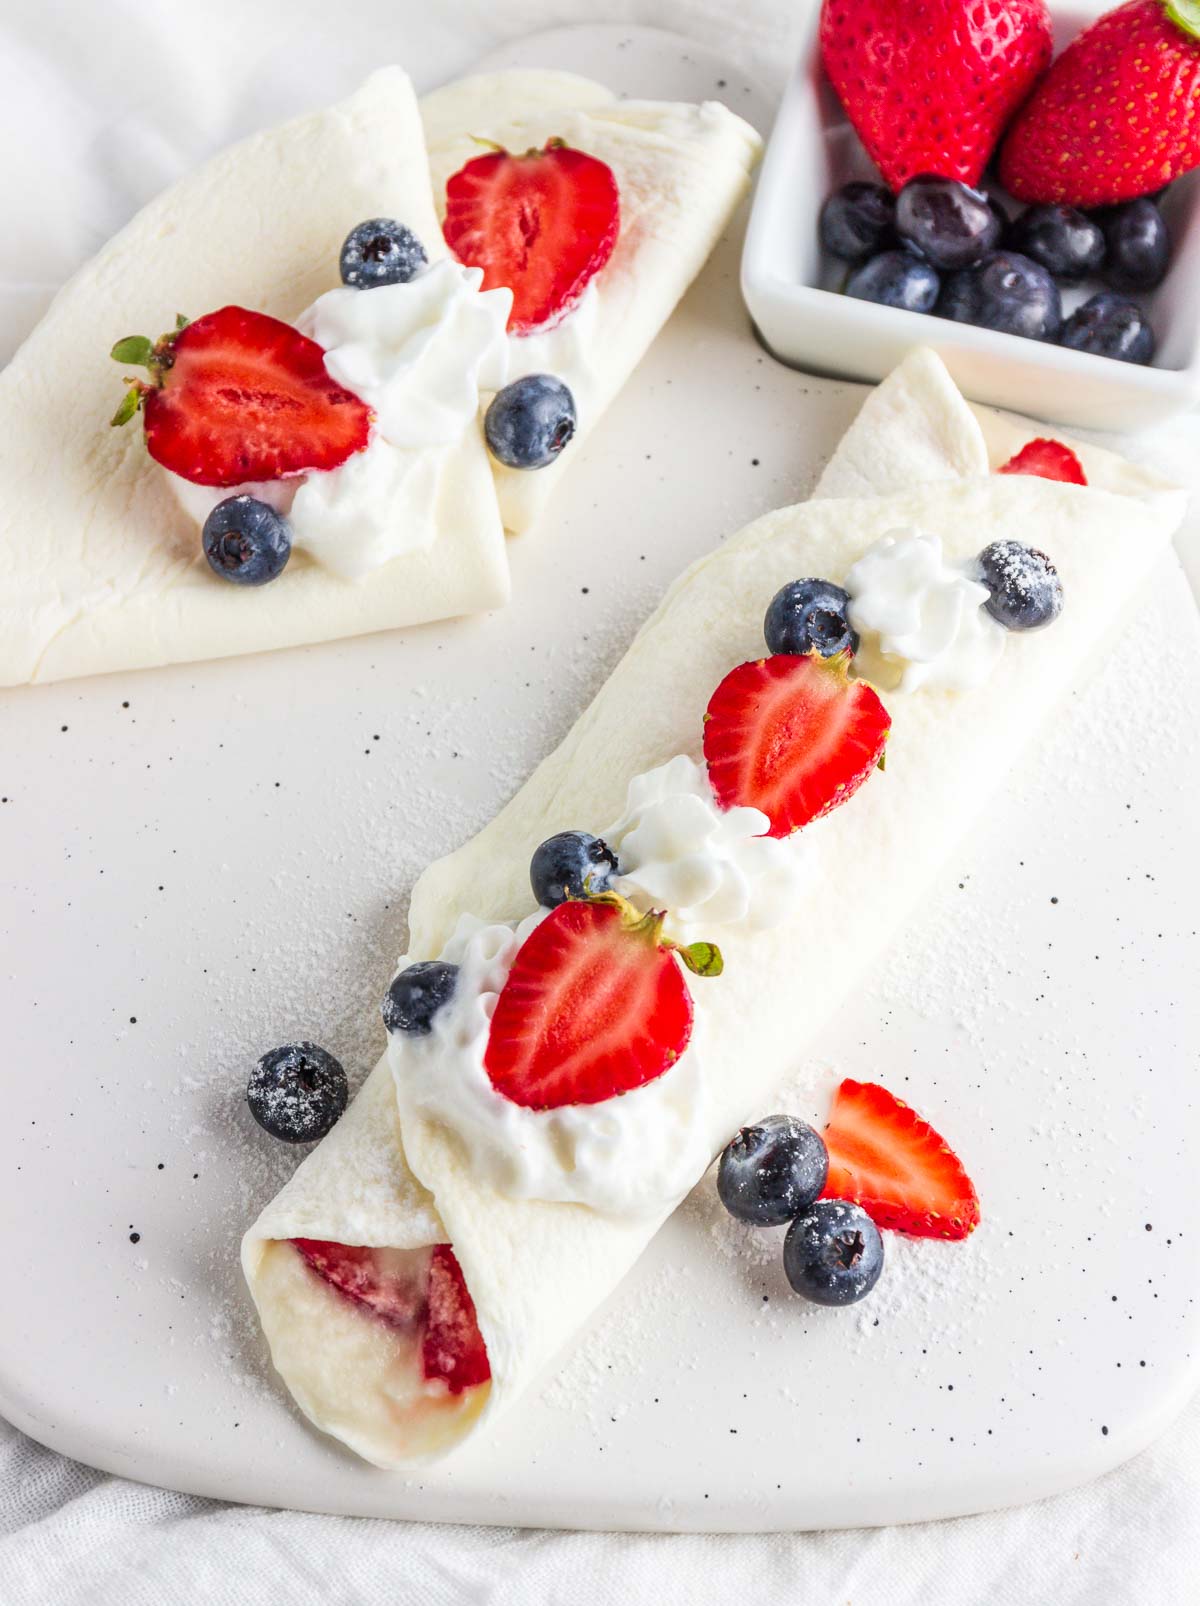 A stuffed crepe with cream and berries.